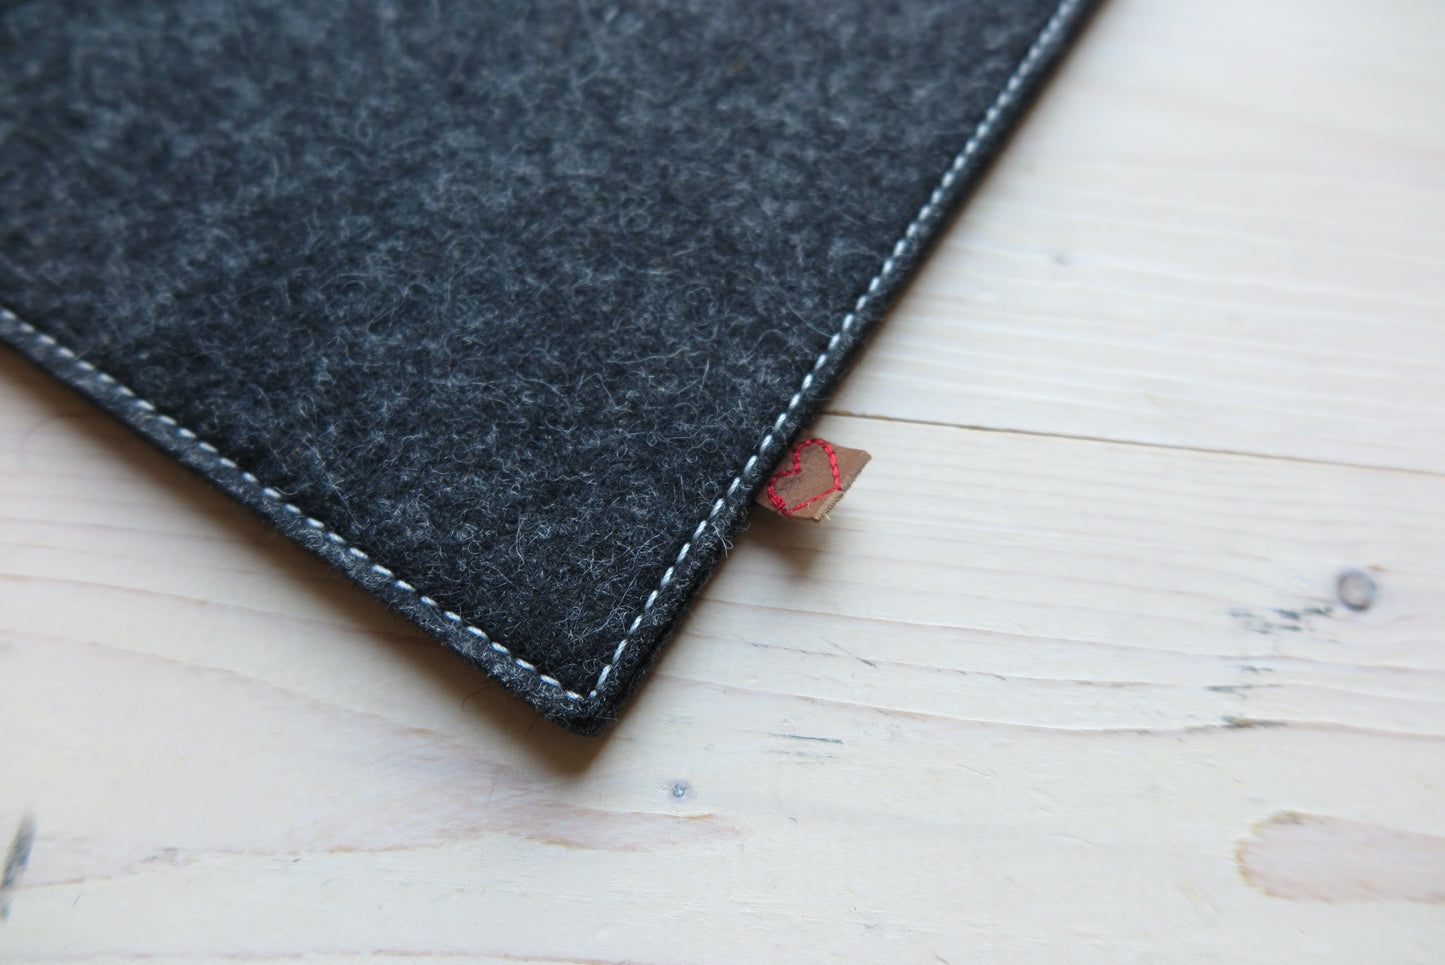 Black felt cover for MS Surface Pro 7 with Type Cover